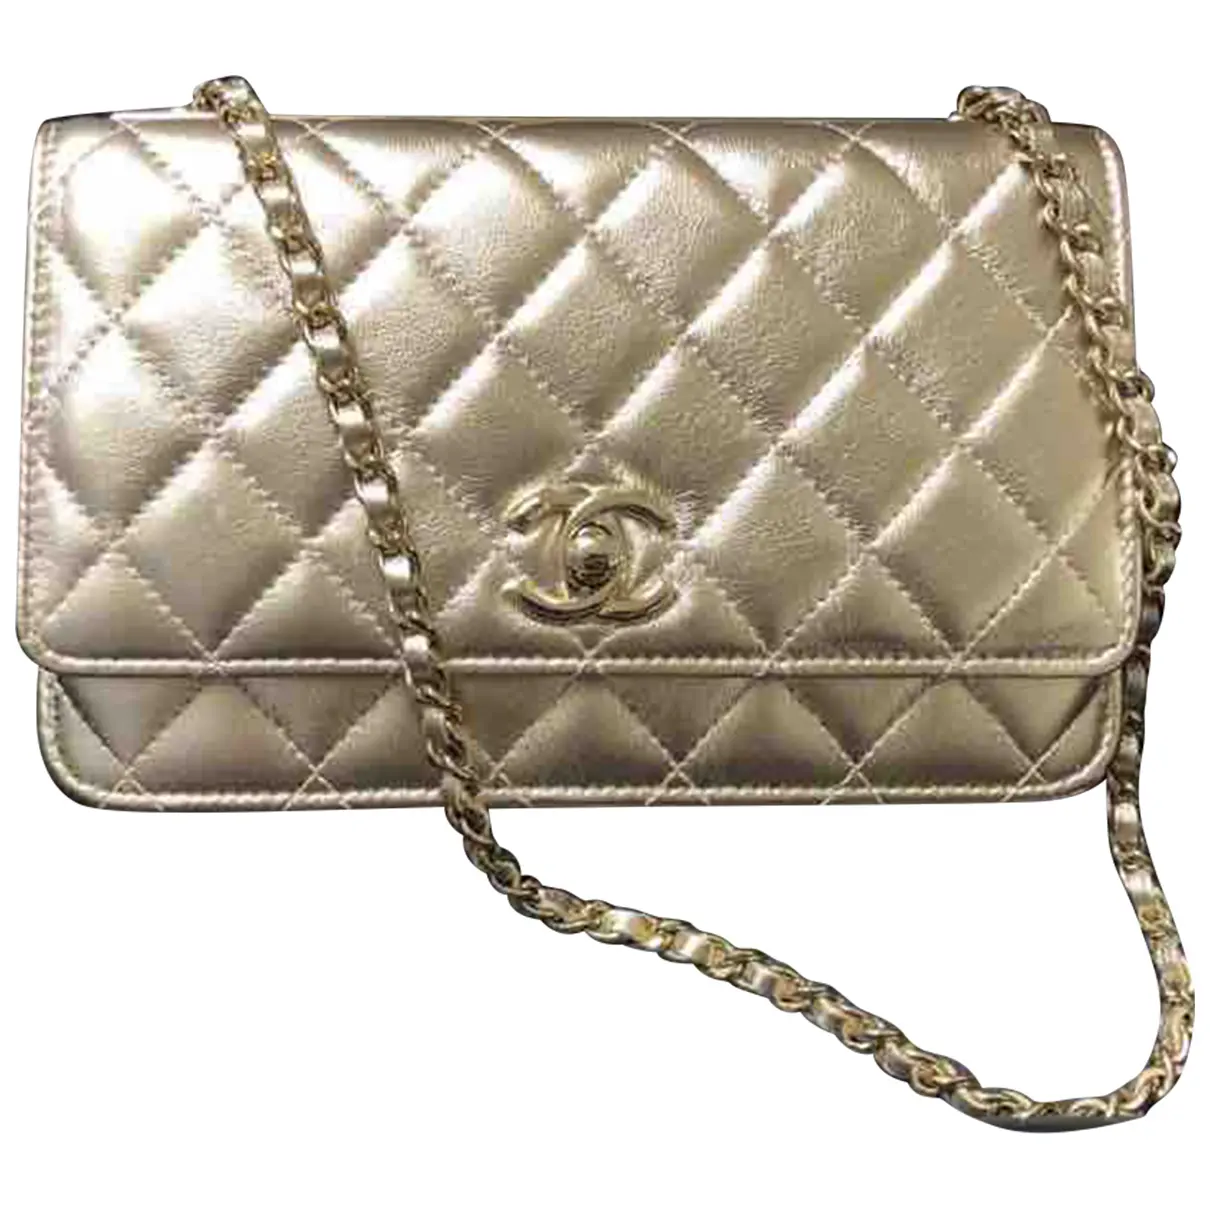 Trendy CC Wallet on Chain leather crossbody bag Chanel